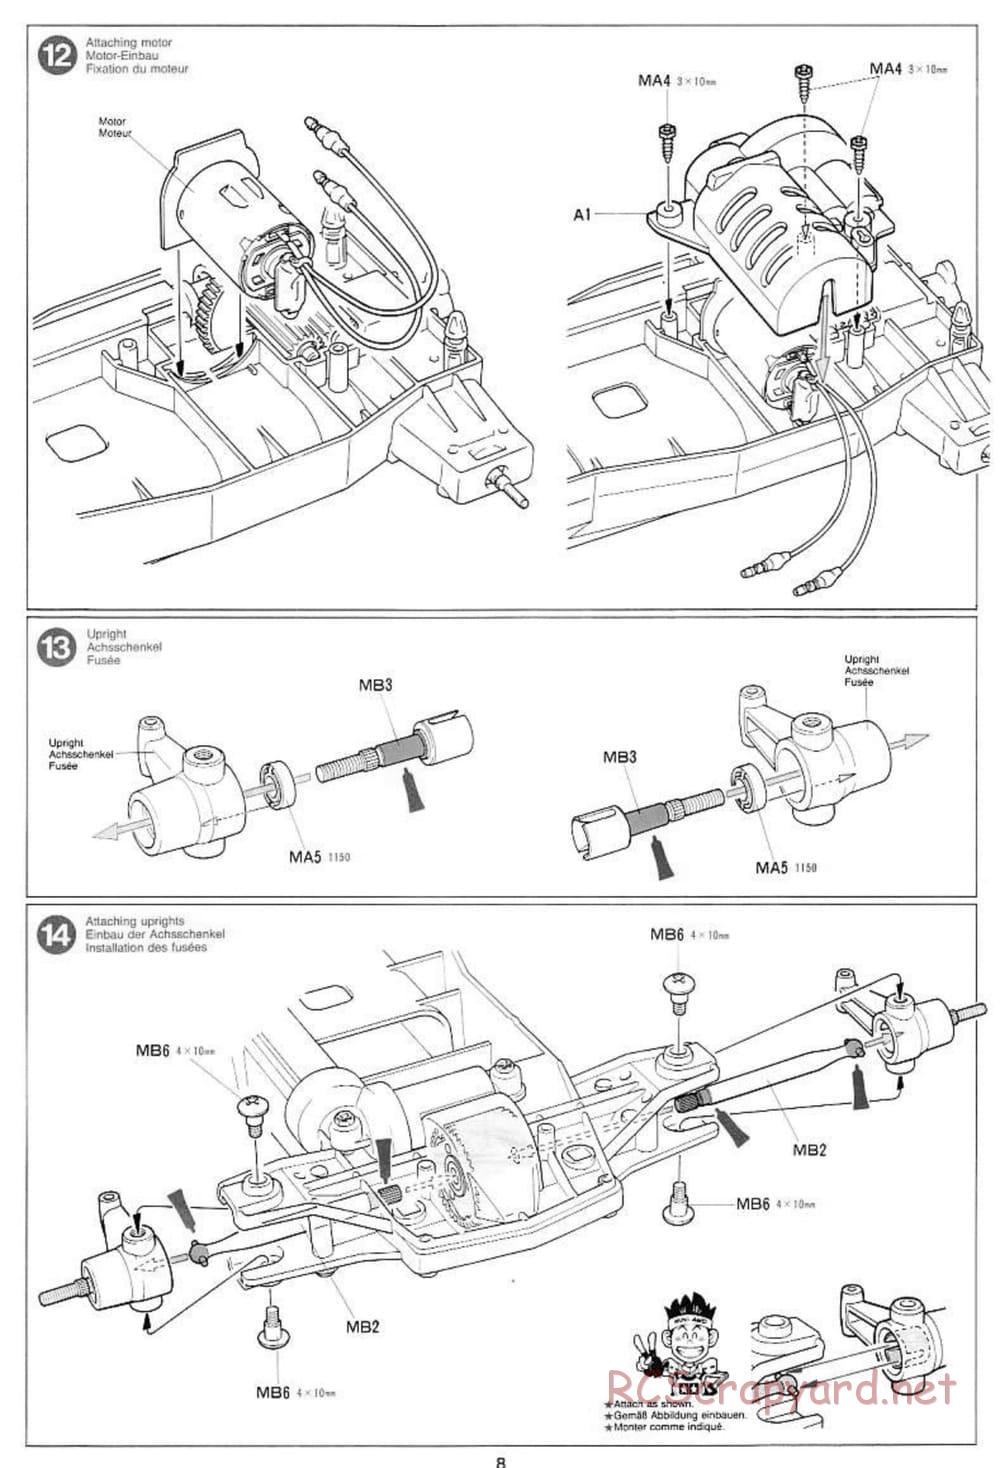 Tamiya - Voltec Fighter - Boy's 4WD Chassis - Manual - Page 8